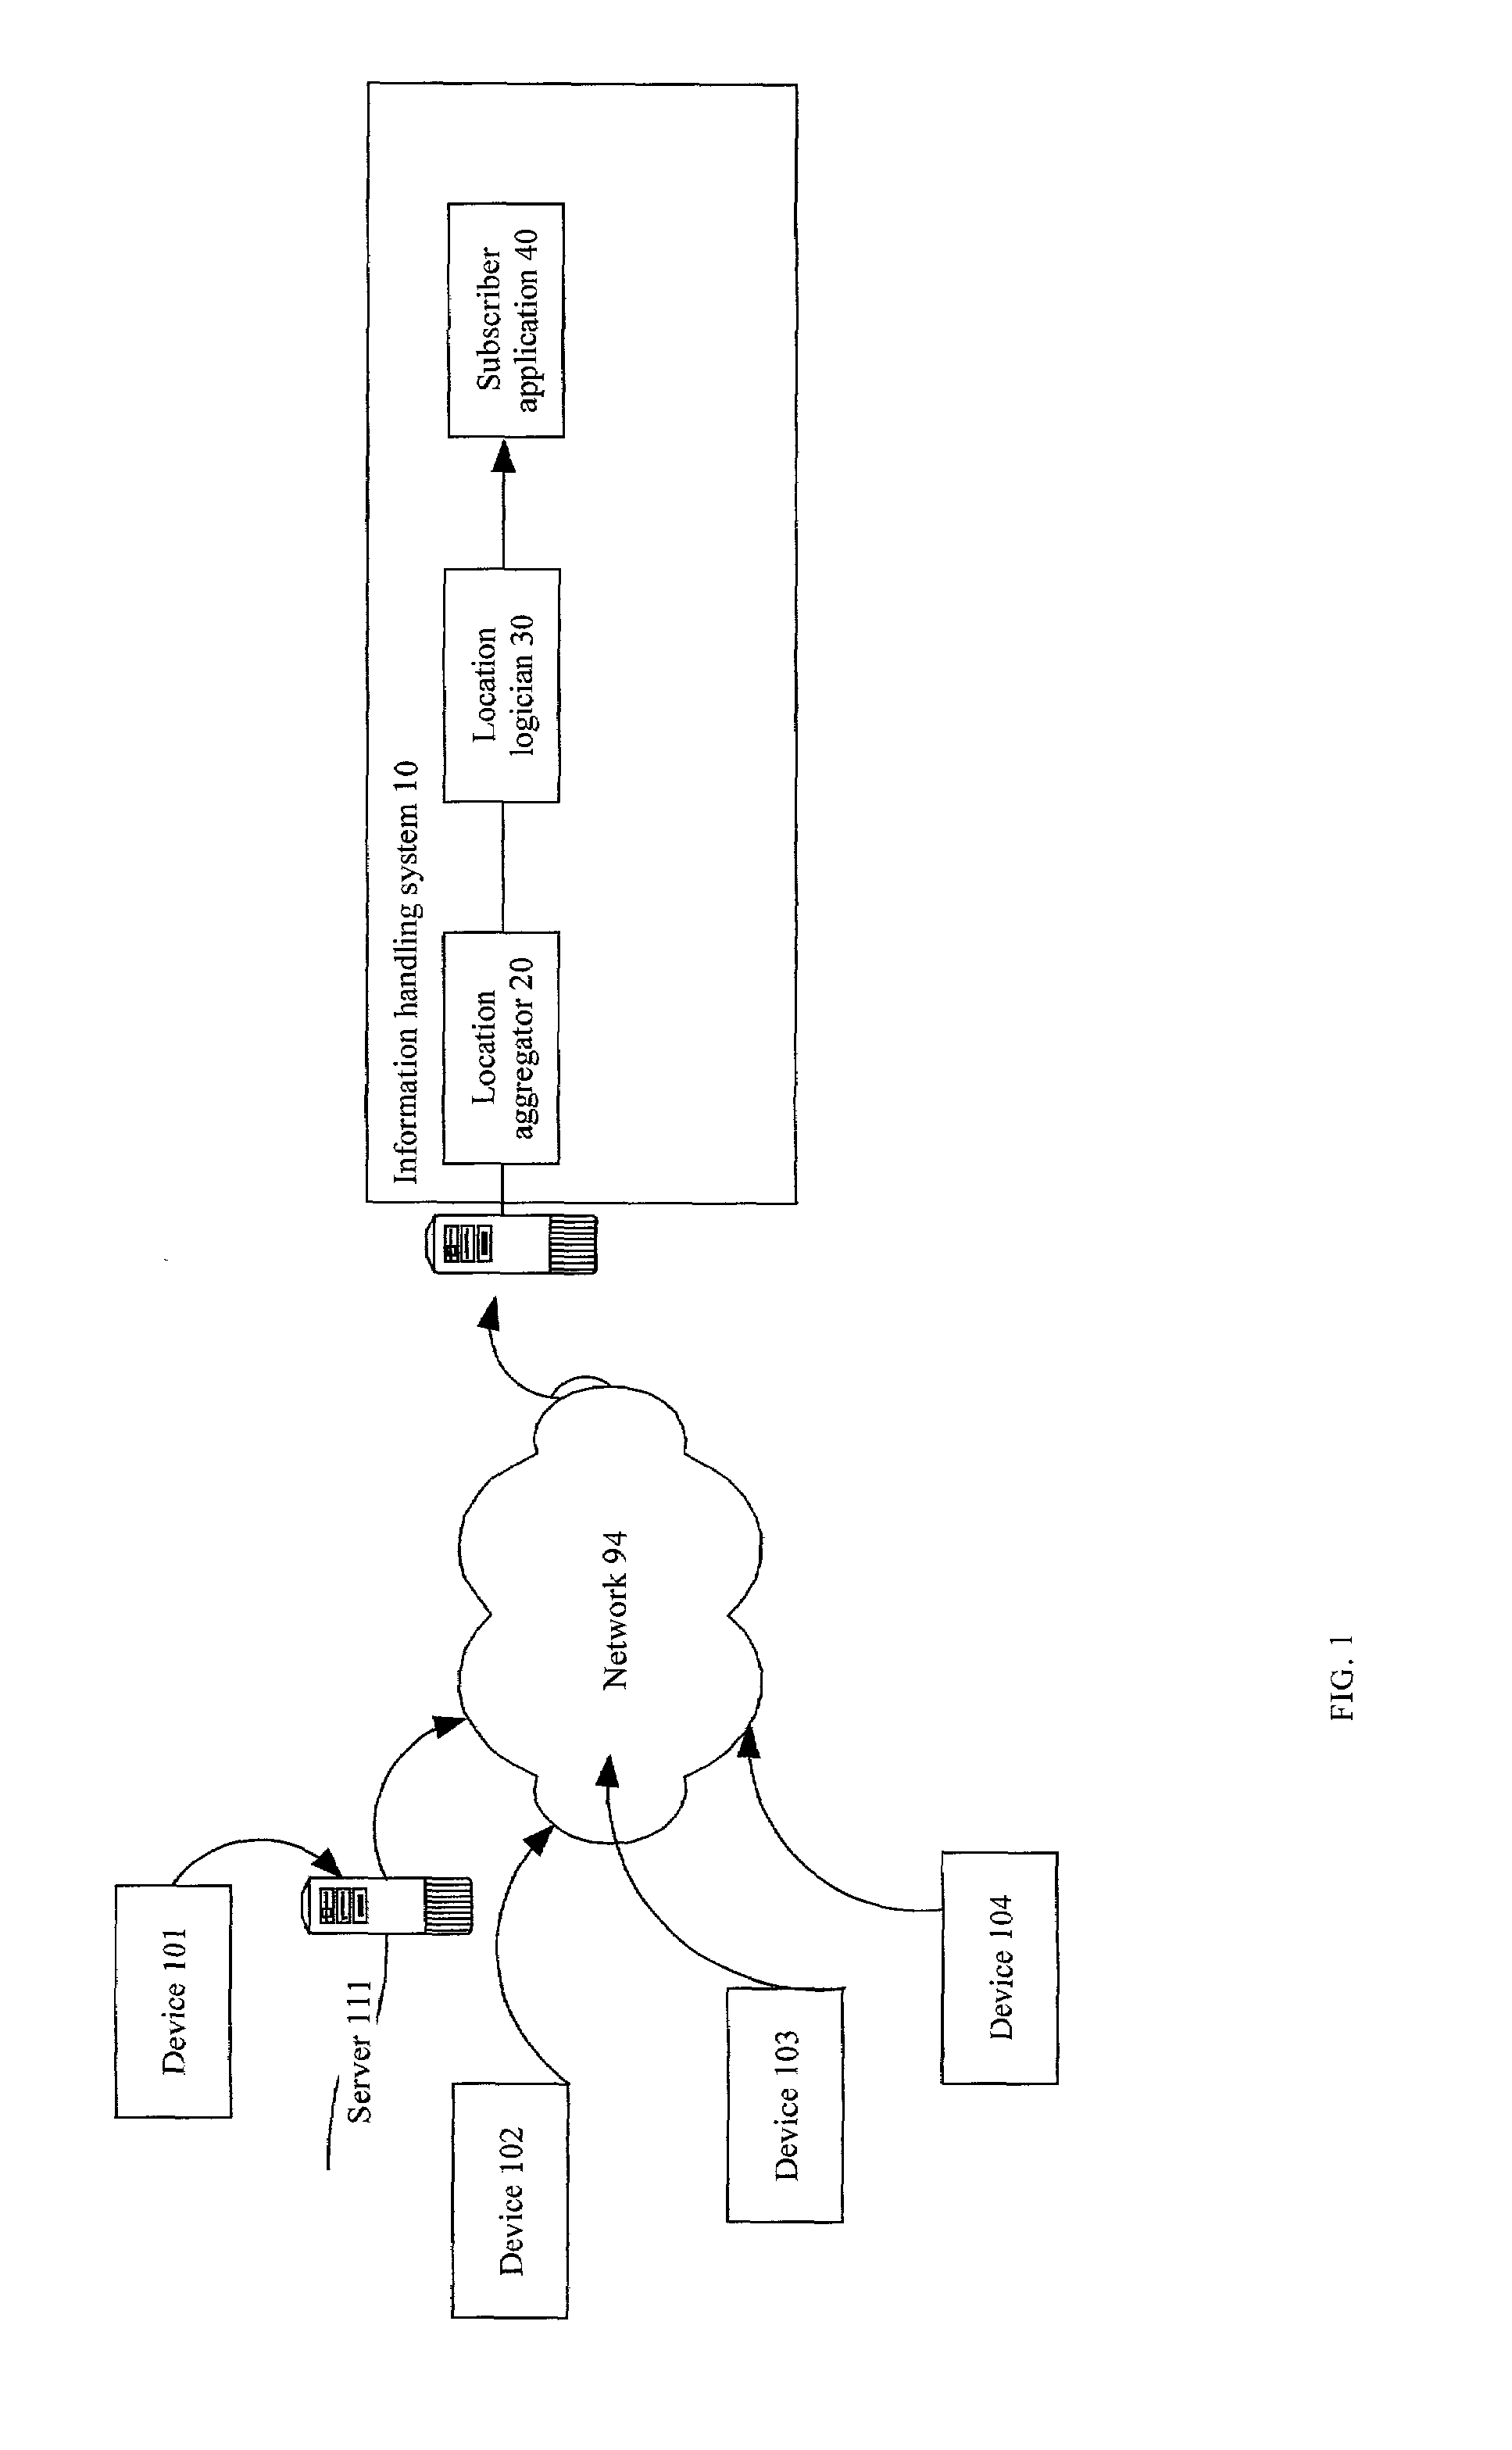 System and method for aggregating information to determine users' locations